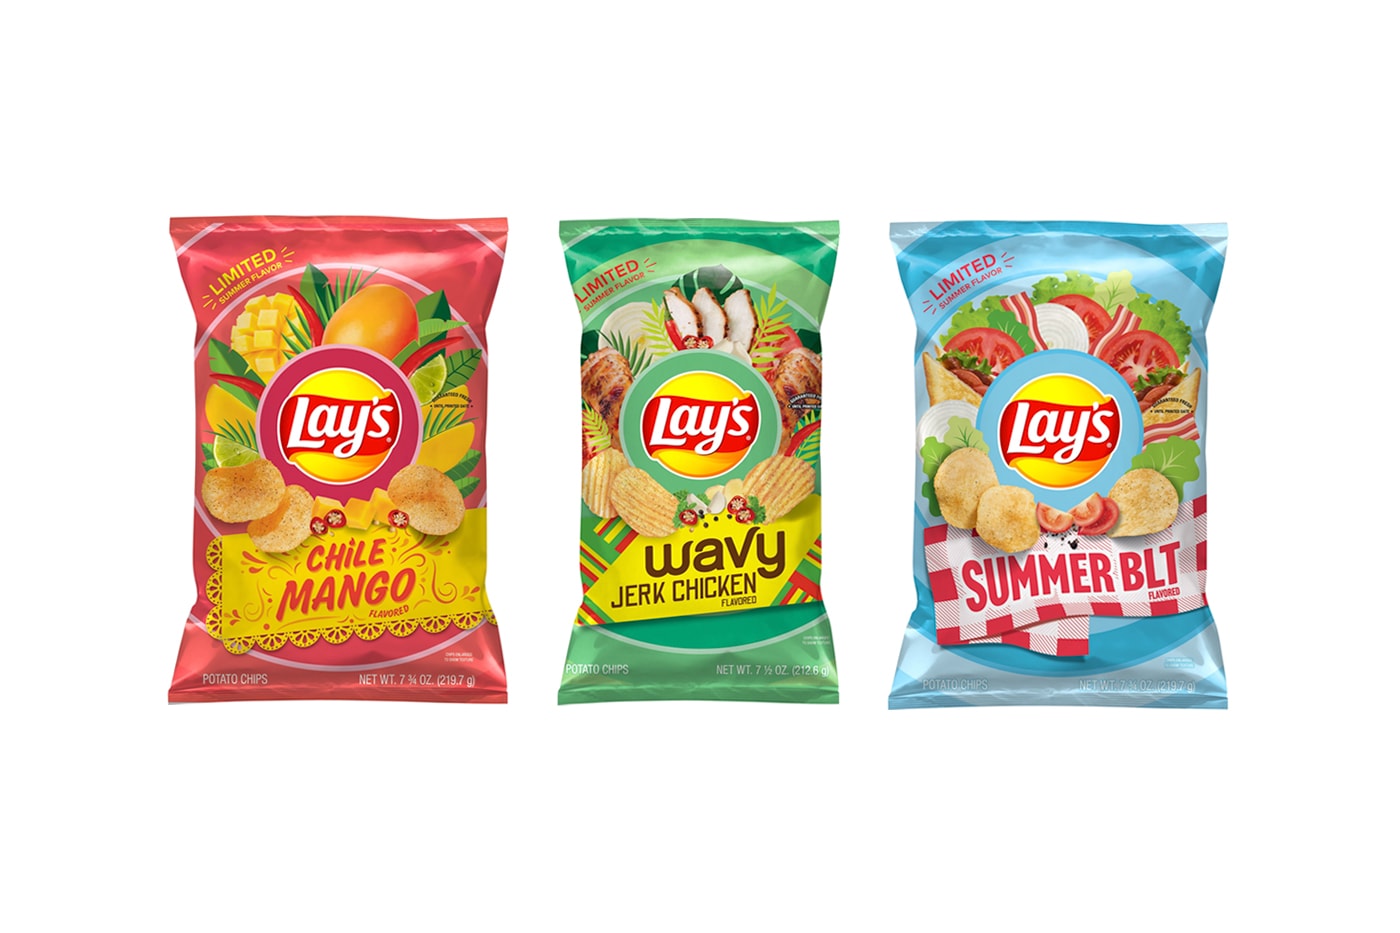 Frito Lay limited edition Lays Chile Mango Wavy Jerk Chicken Summer BLT flavor snacks chips crisps bacon tomato lettuce chile peppers tropical info